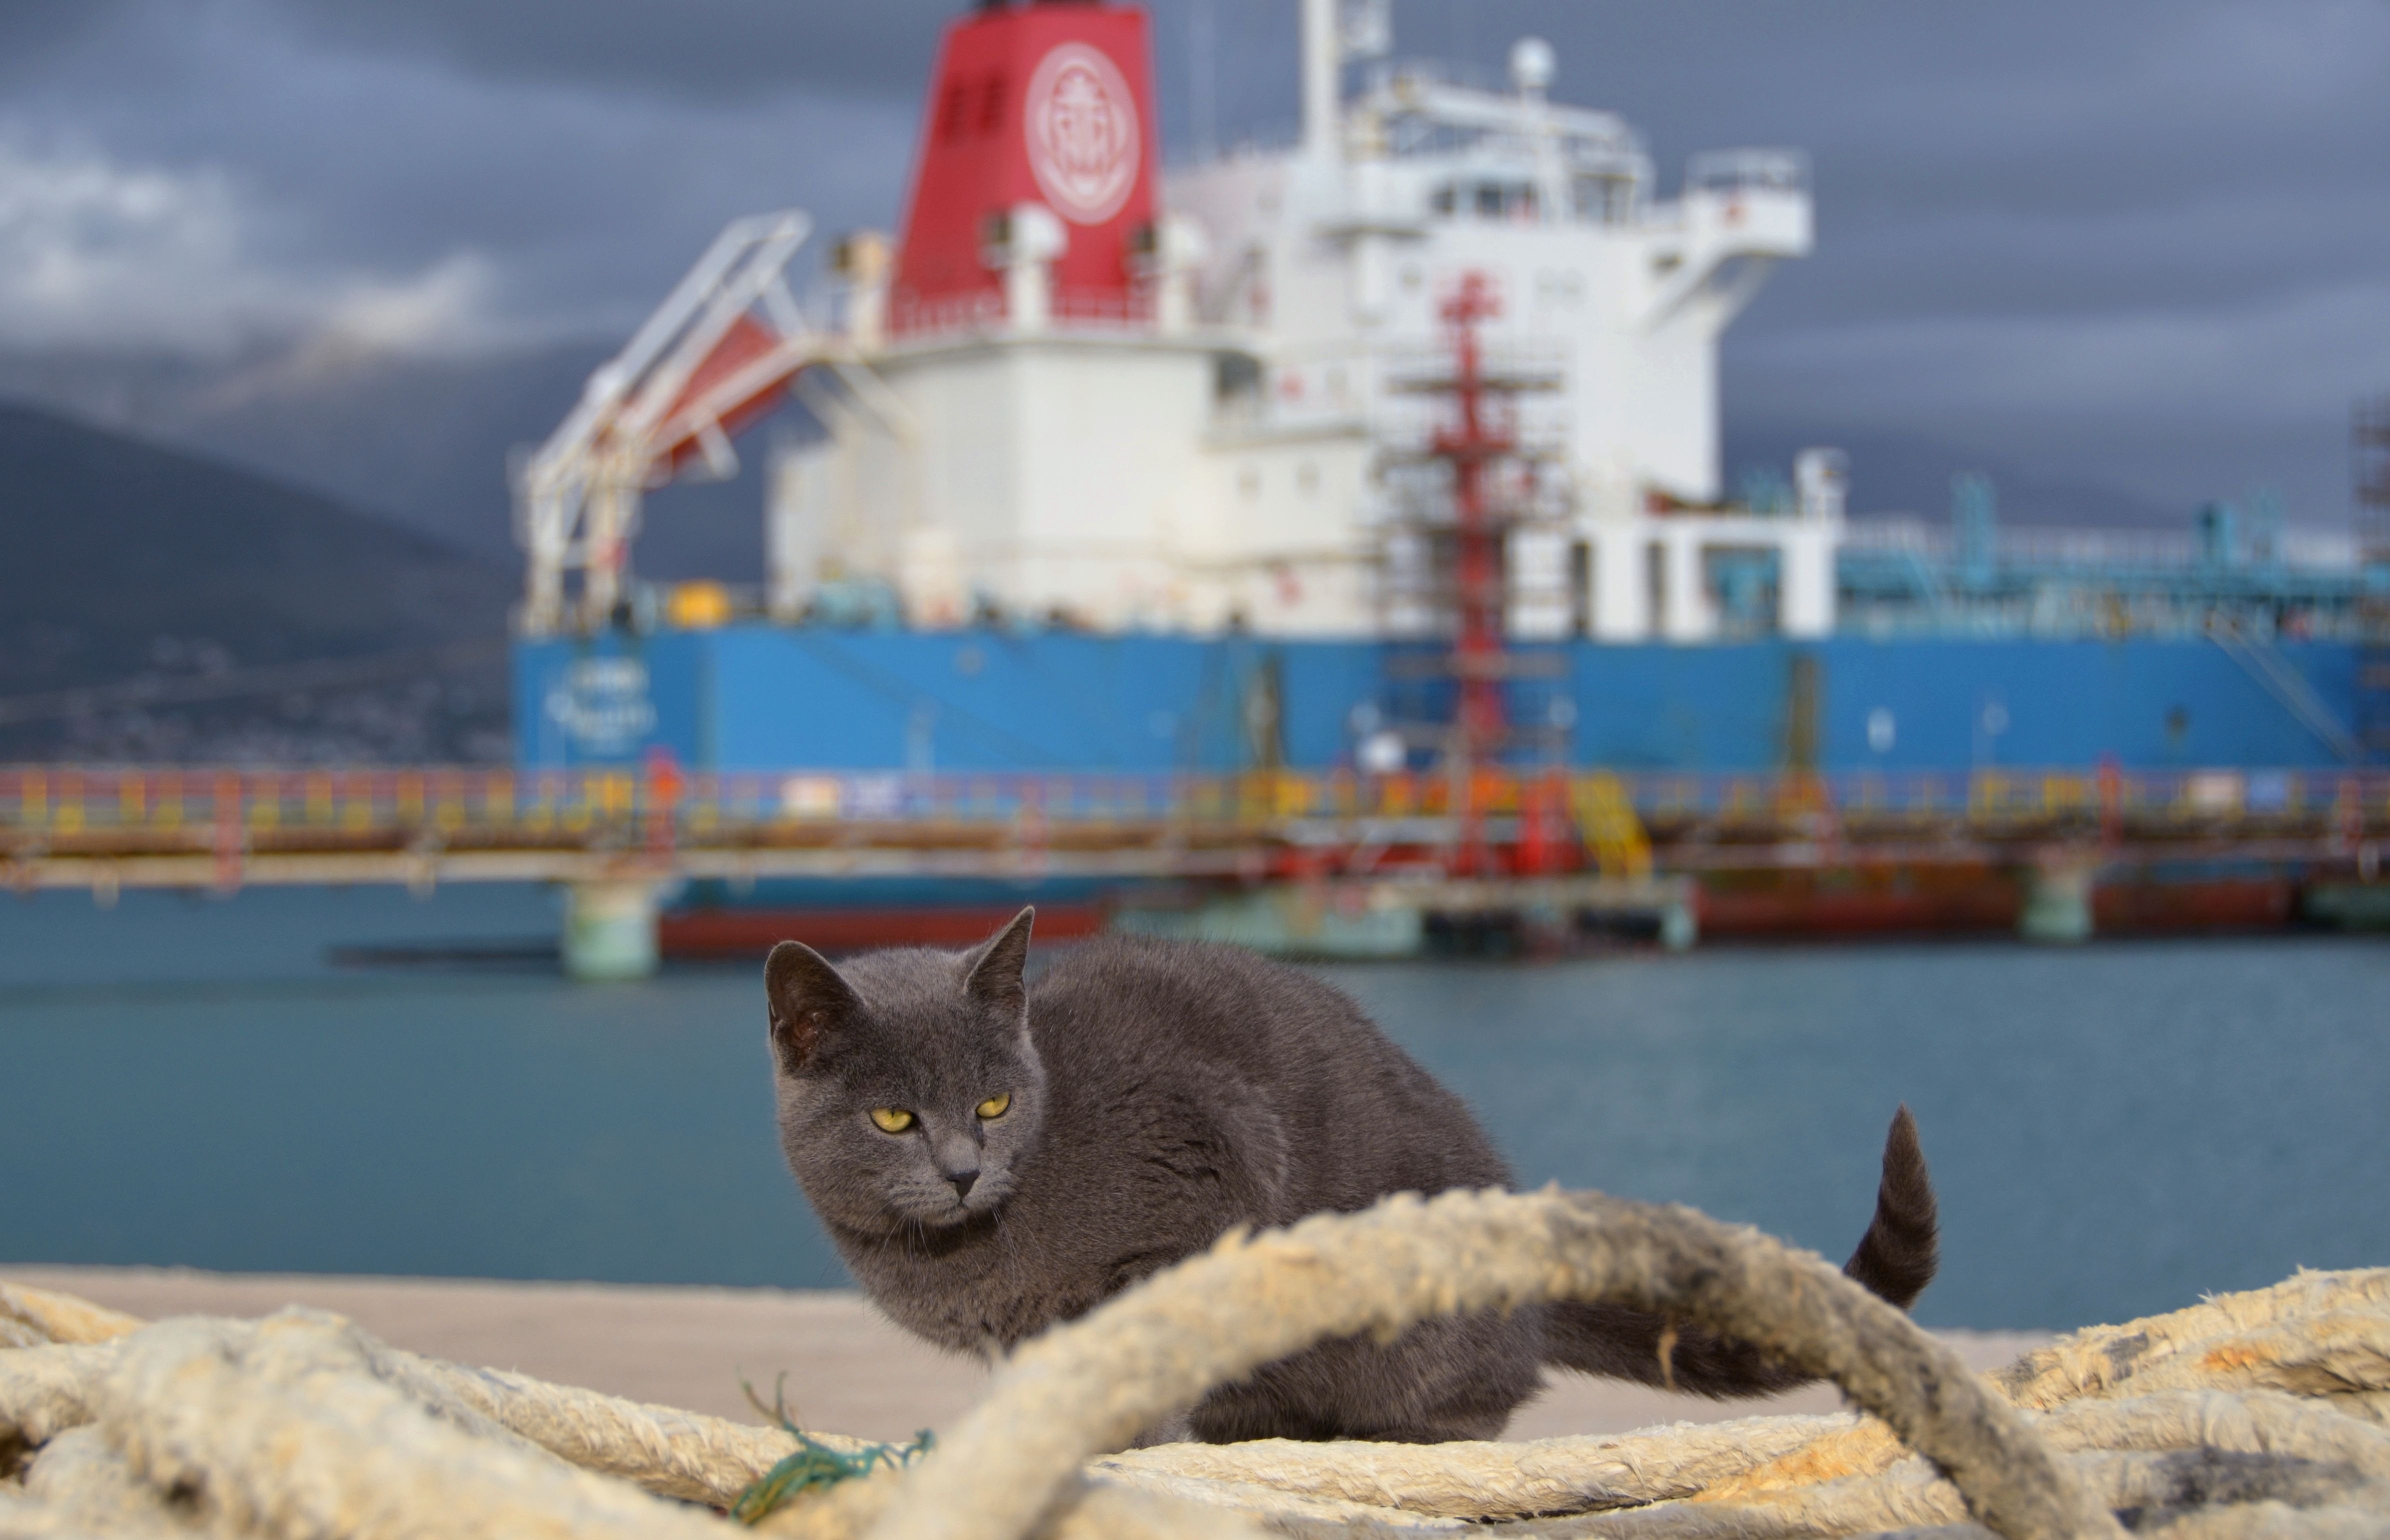 wallpapers sea, animals, sit, cat, ship